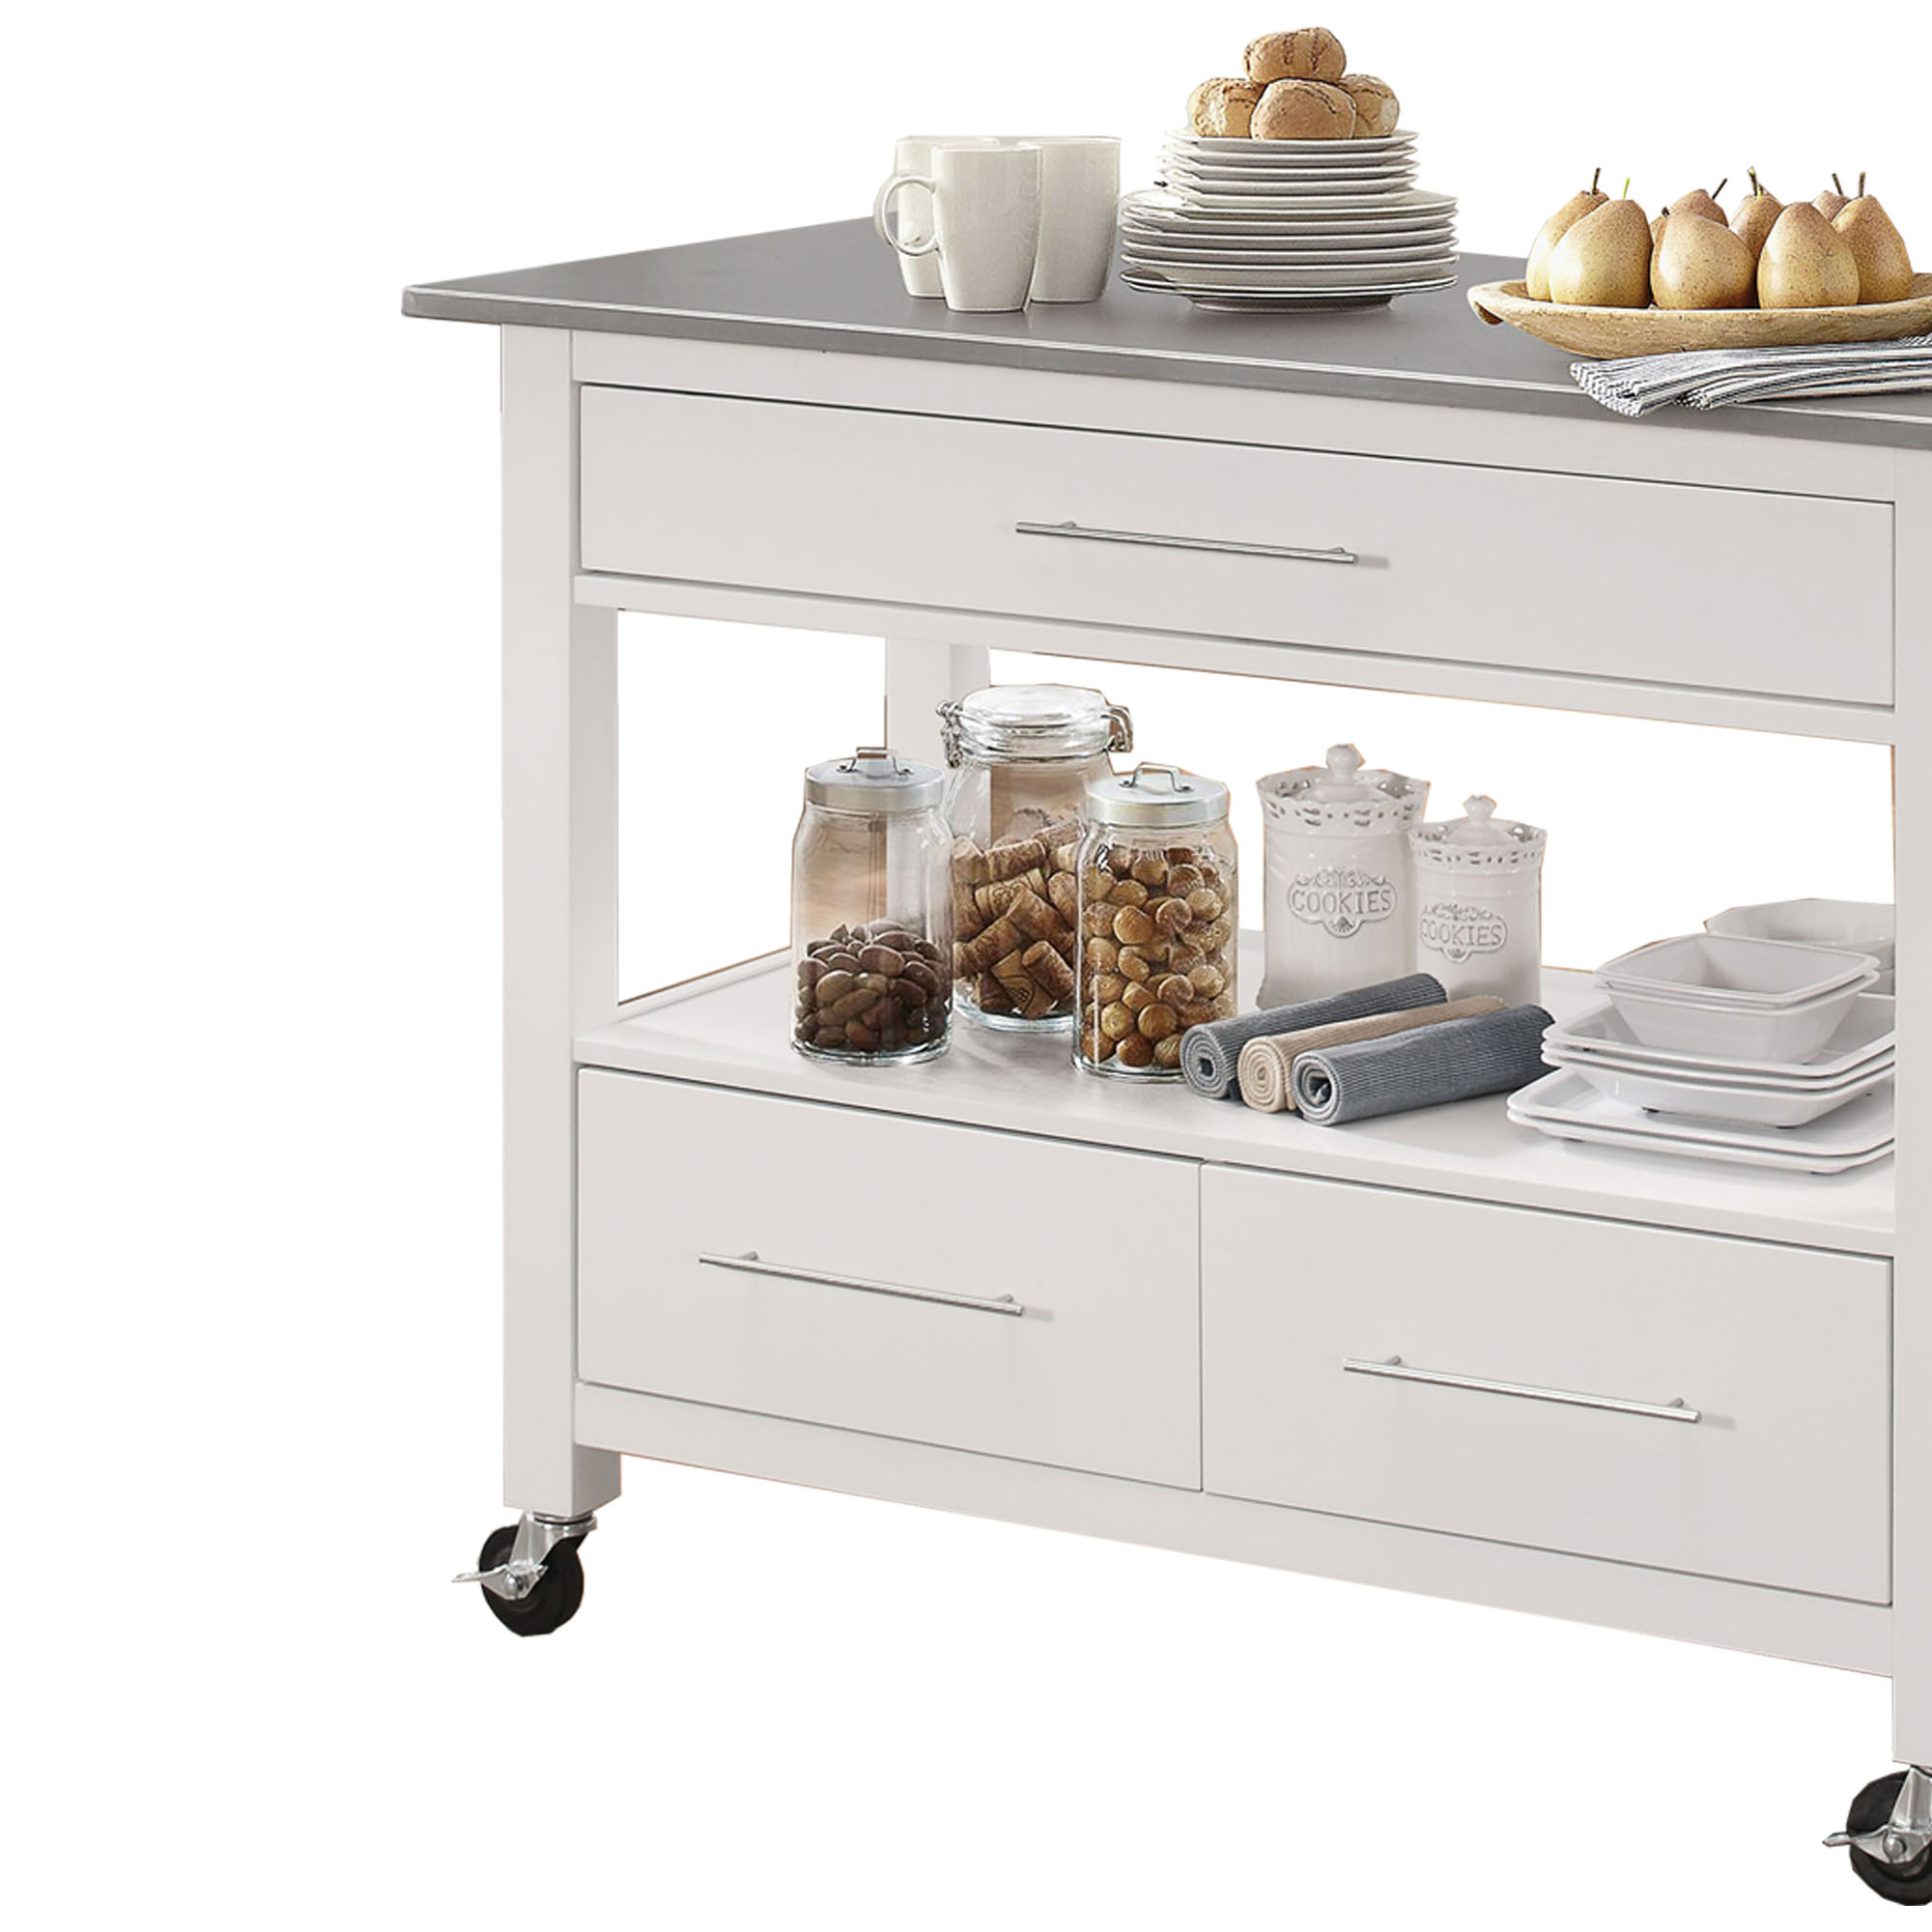 43 Inch Kitchen Cart, 3 Drawers, Open Shelf, Stainless Steel Top, White